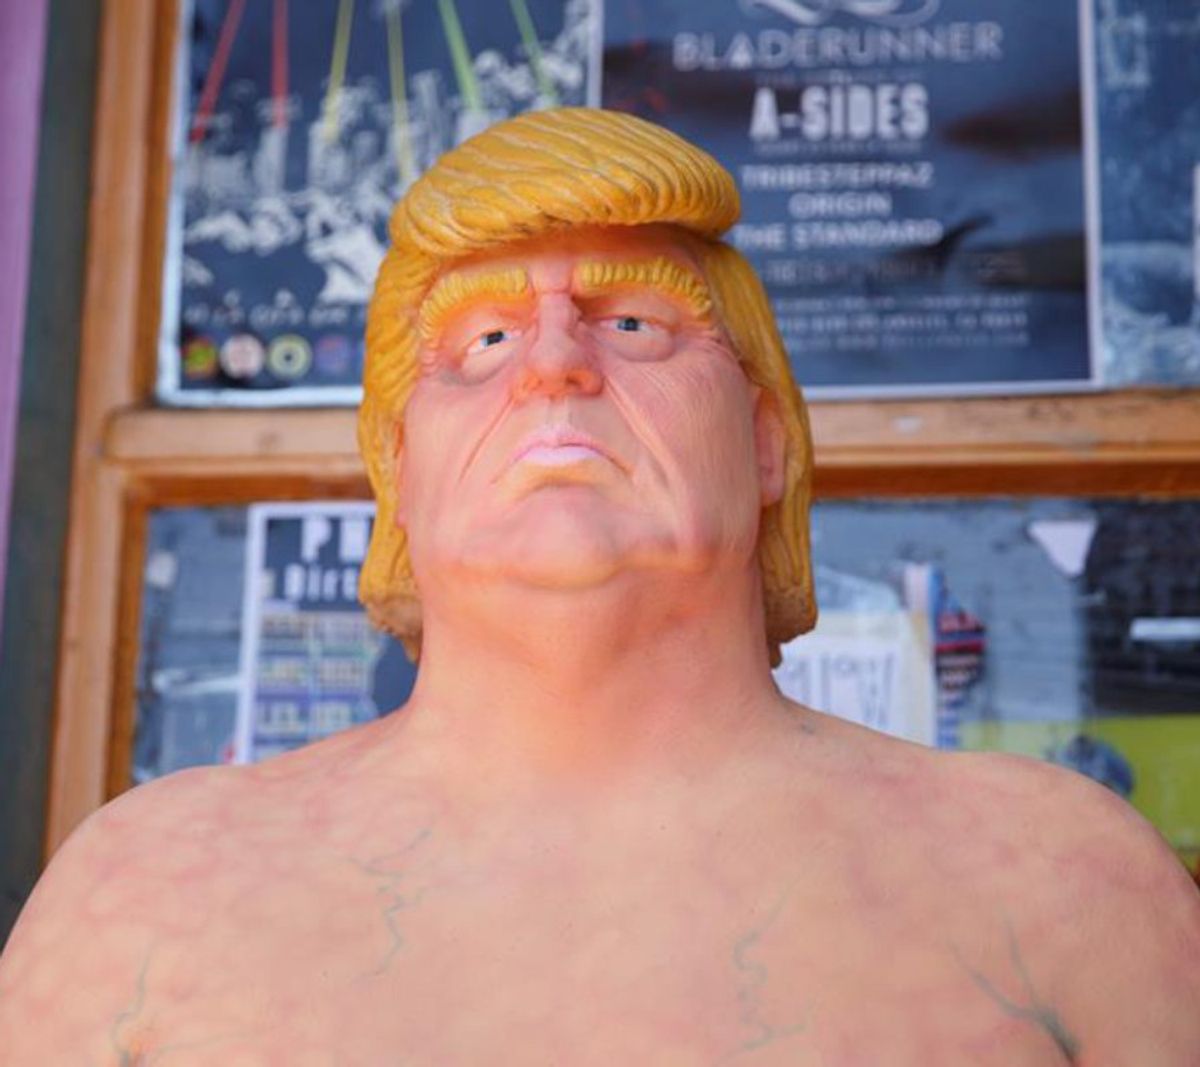 Naked Donald Trump Statue Is Proof The World Has Gone Mad